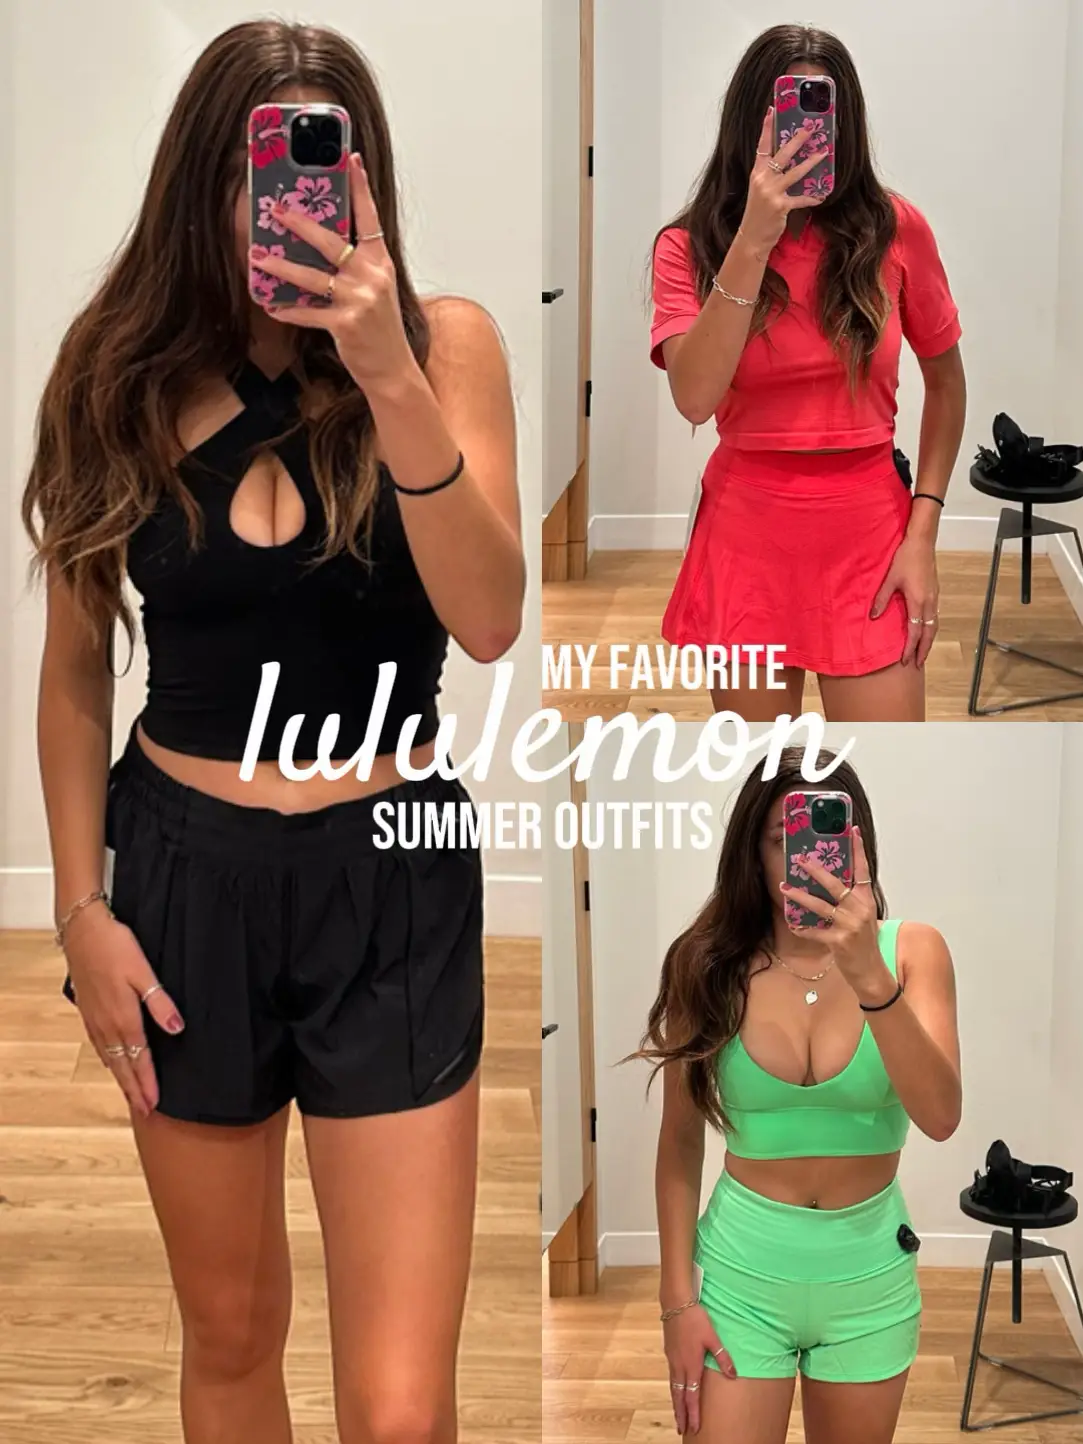 my favorite summer outfits from lululemon, Gallery posted by marissa